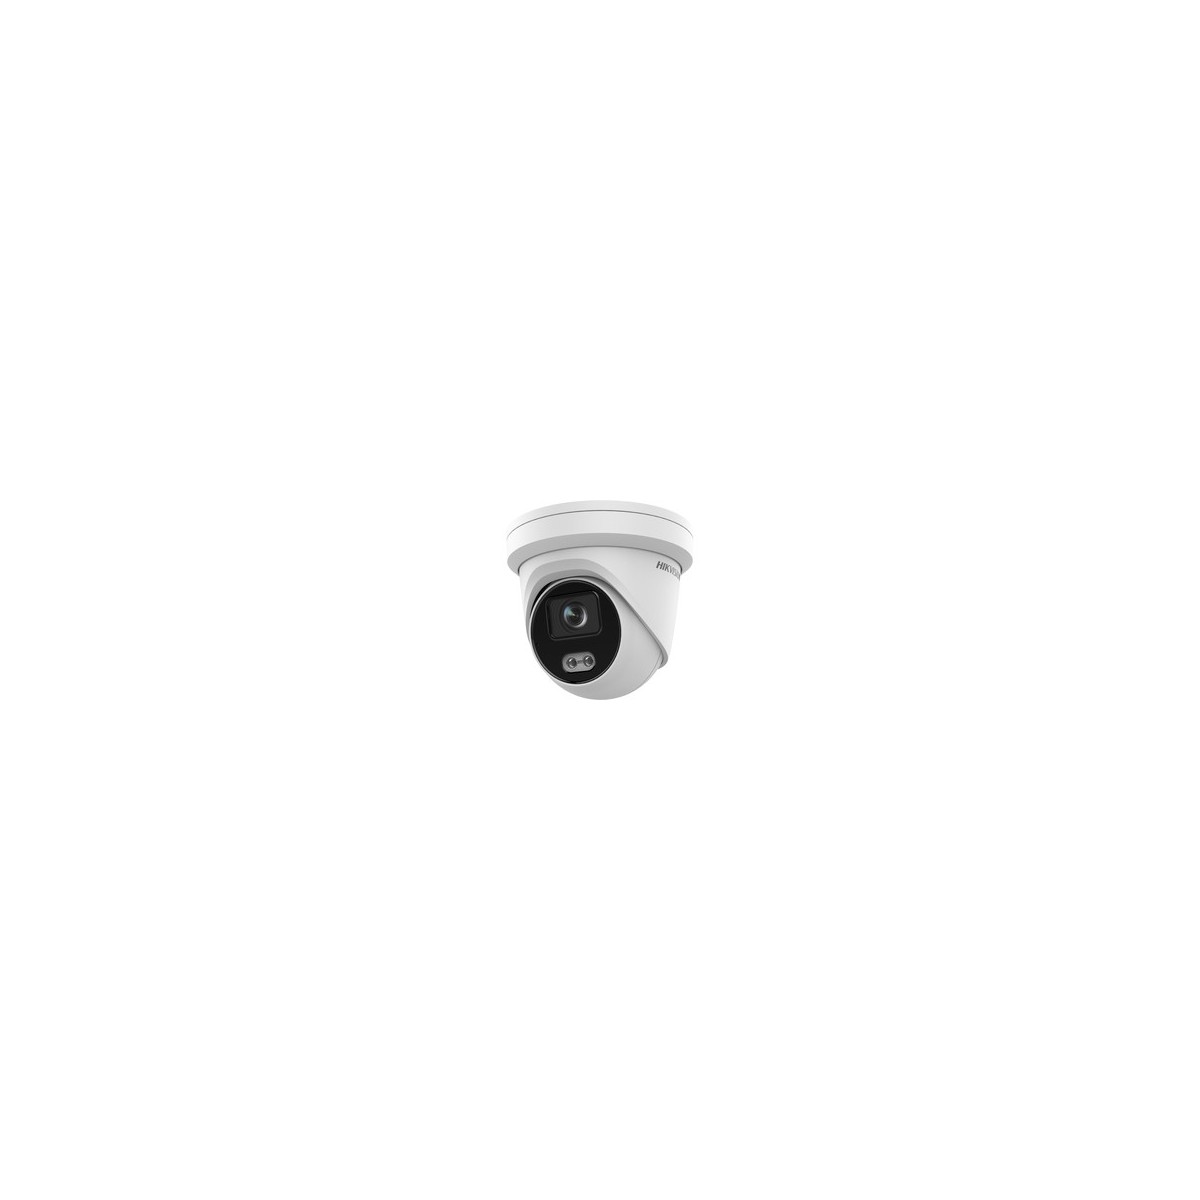 Hikvision Digital Technology DS-2CD2327G2-L(2.8MM) - IP security camera - Outdoor - Wired - Multi - Class B FCC SDoC (47 CFR Par